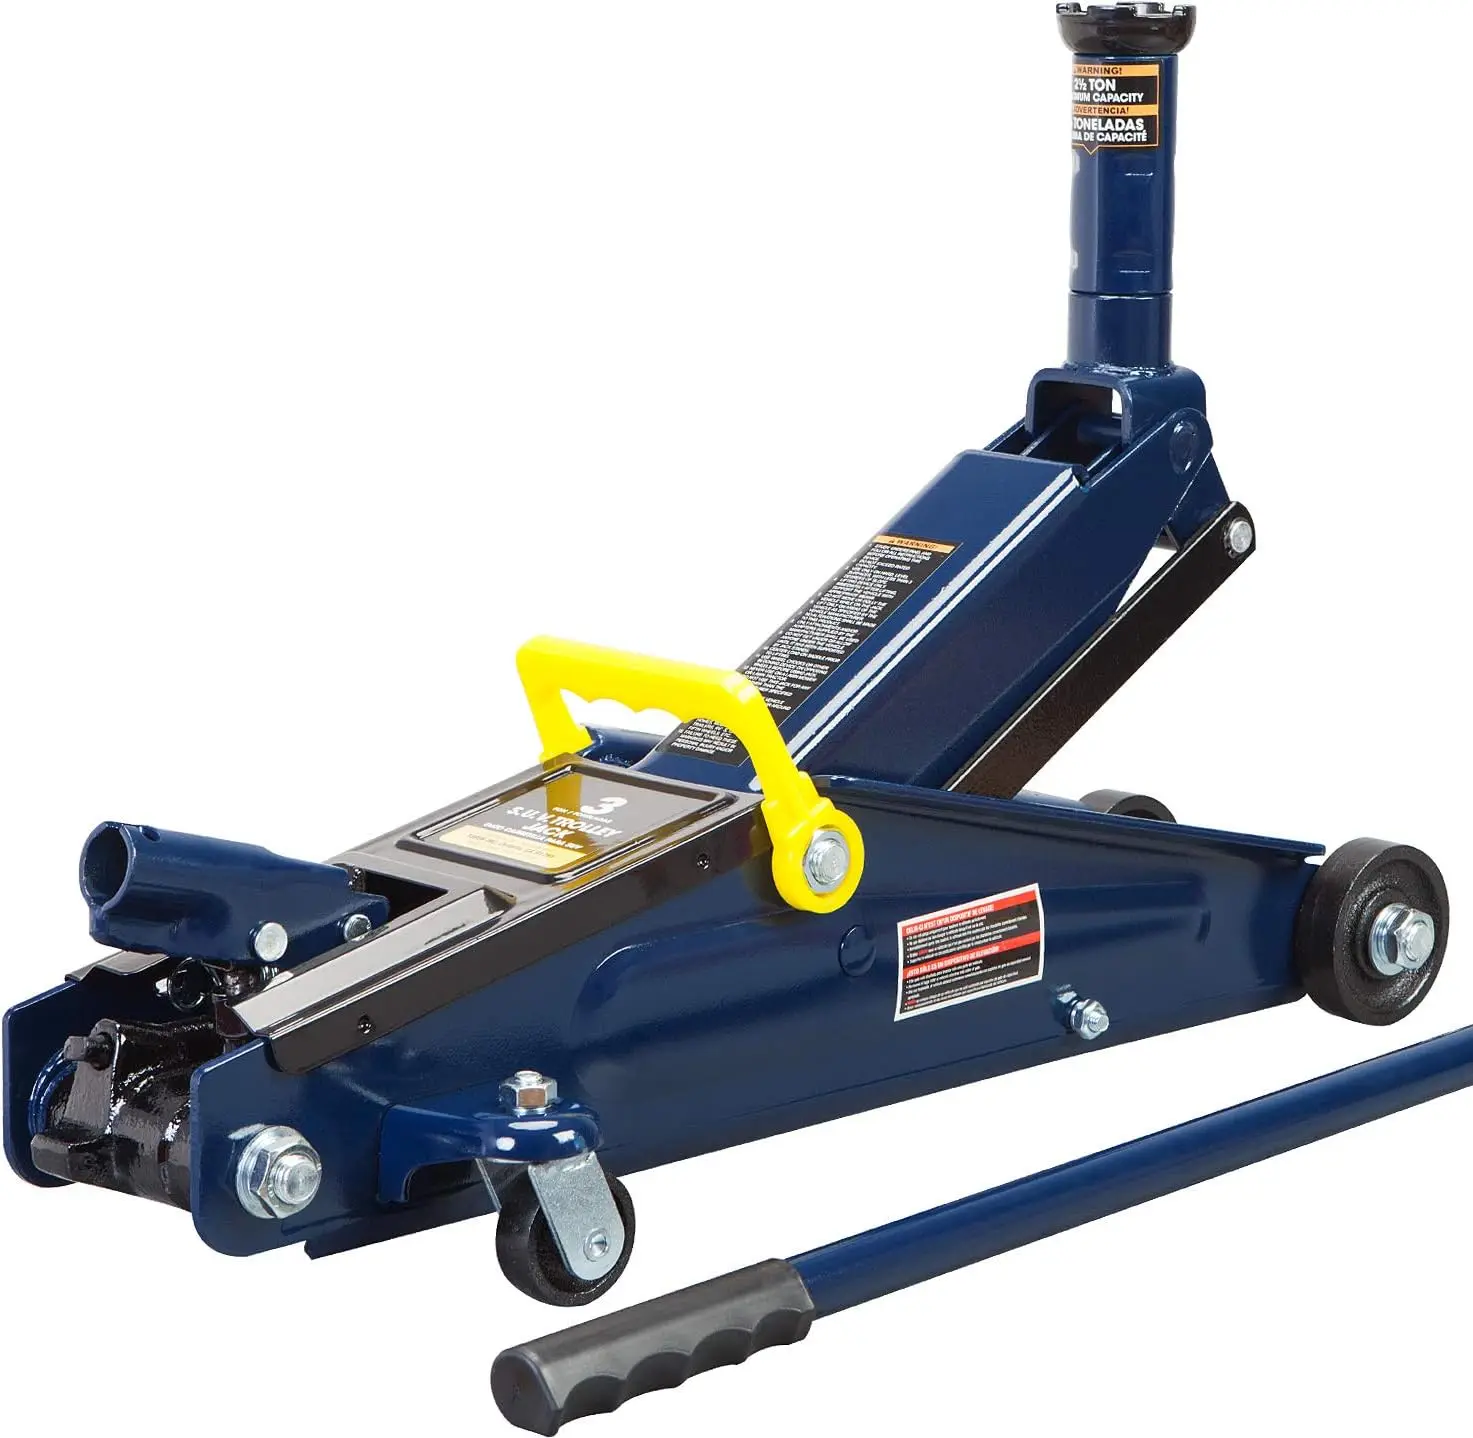 

Hydraulic Trolley Service/Floor Jack with Extra Saddle (Fits SUVs and Extended Height Trucks) 3 Ton (6,000 lb) Capacity, Blue